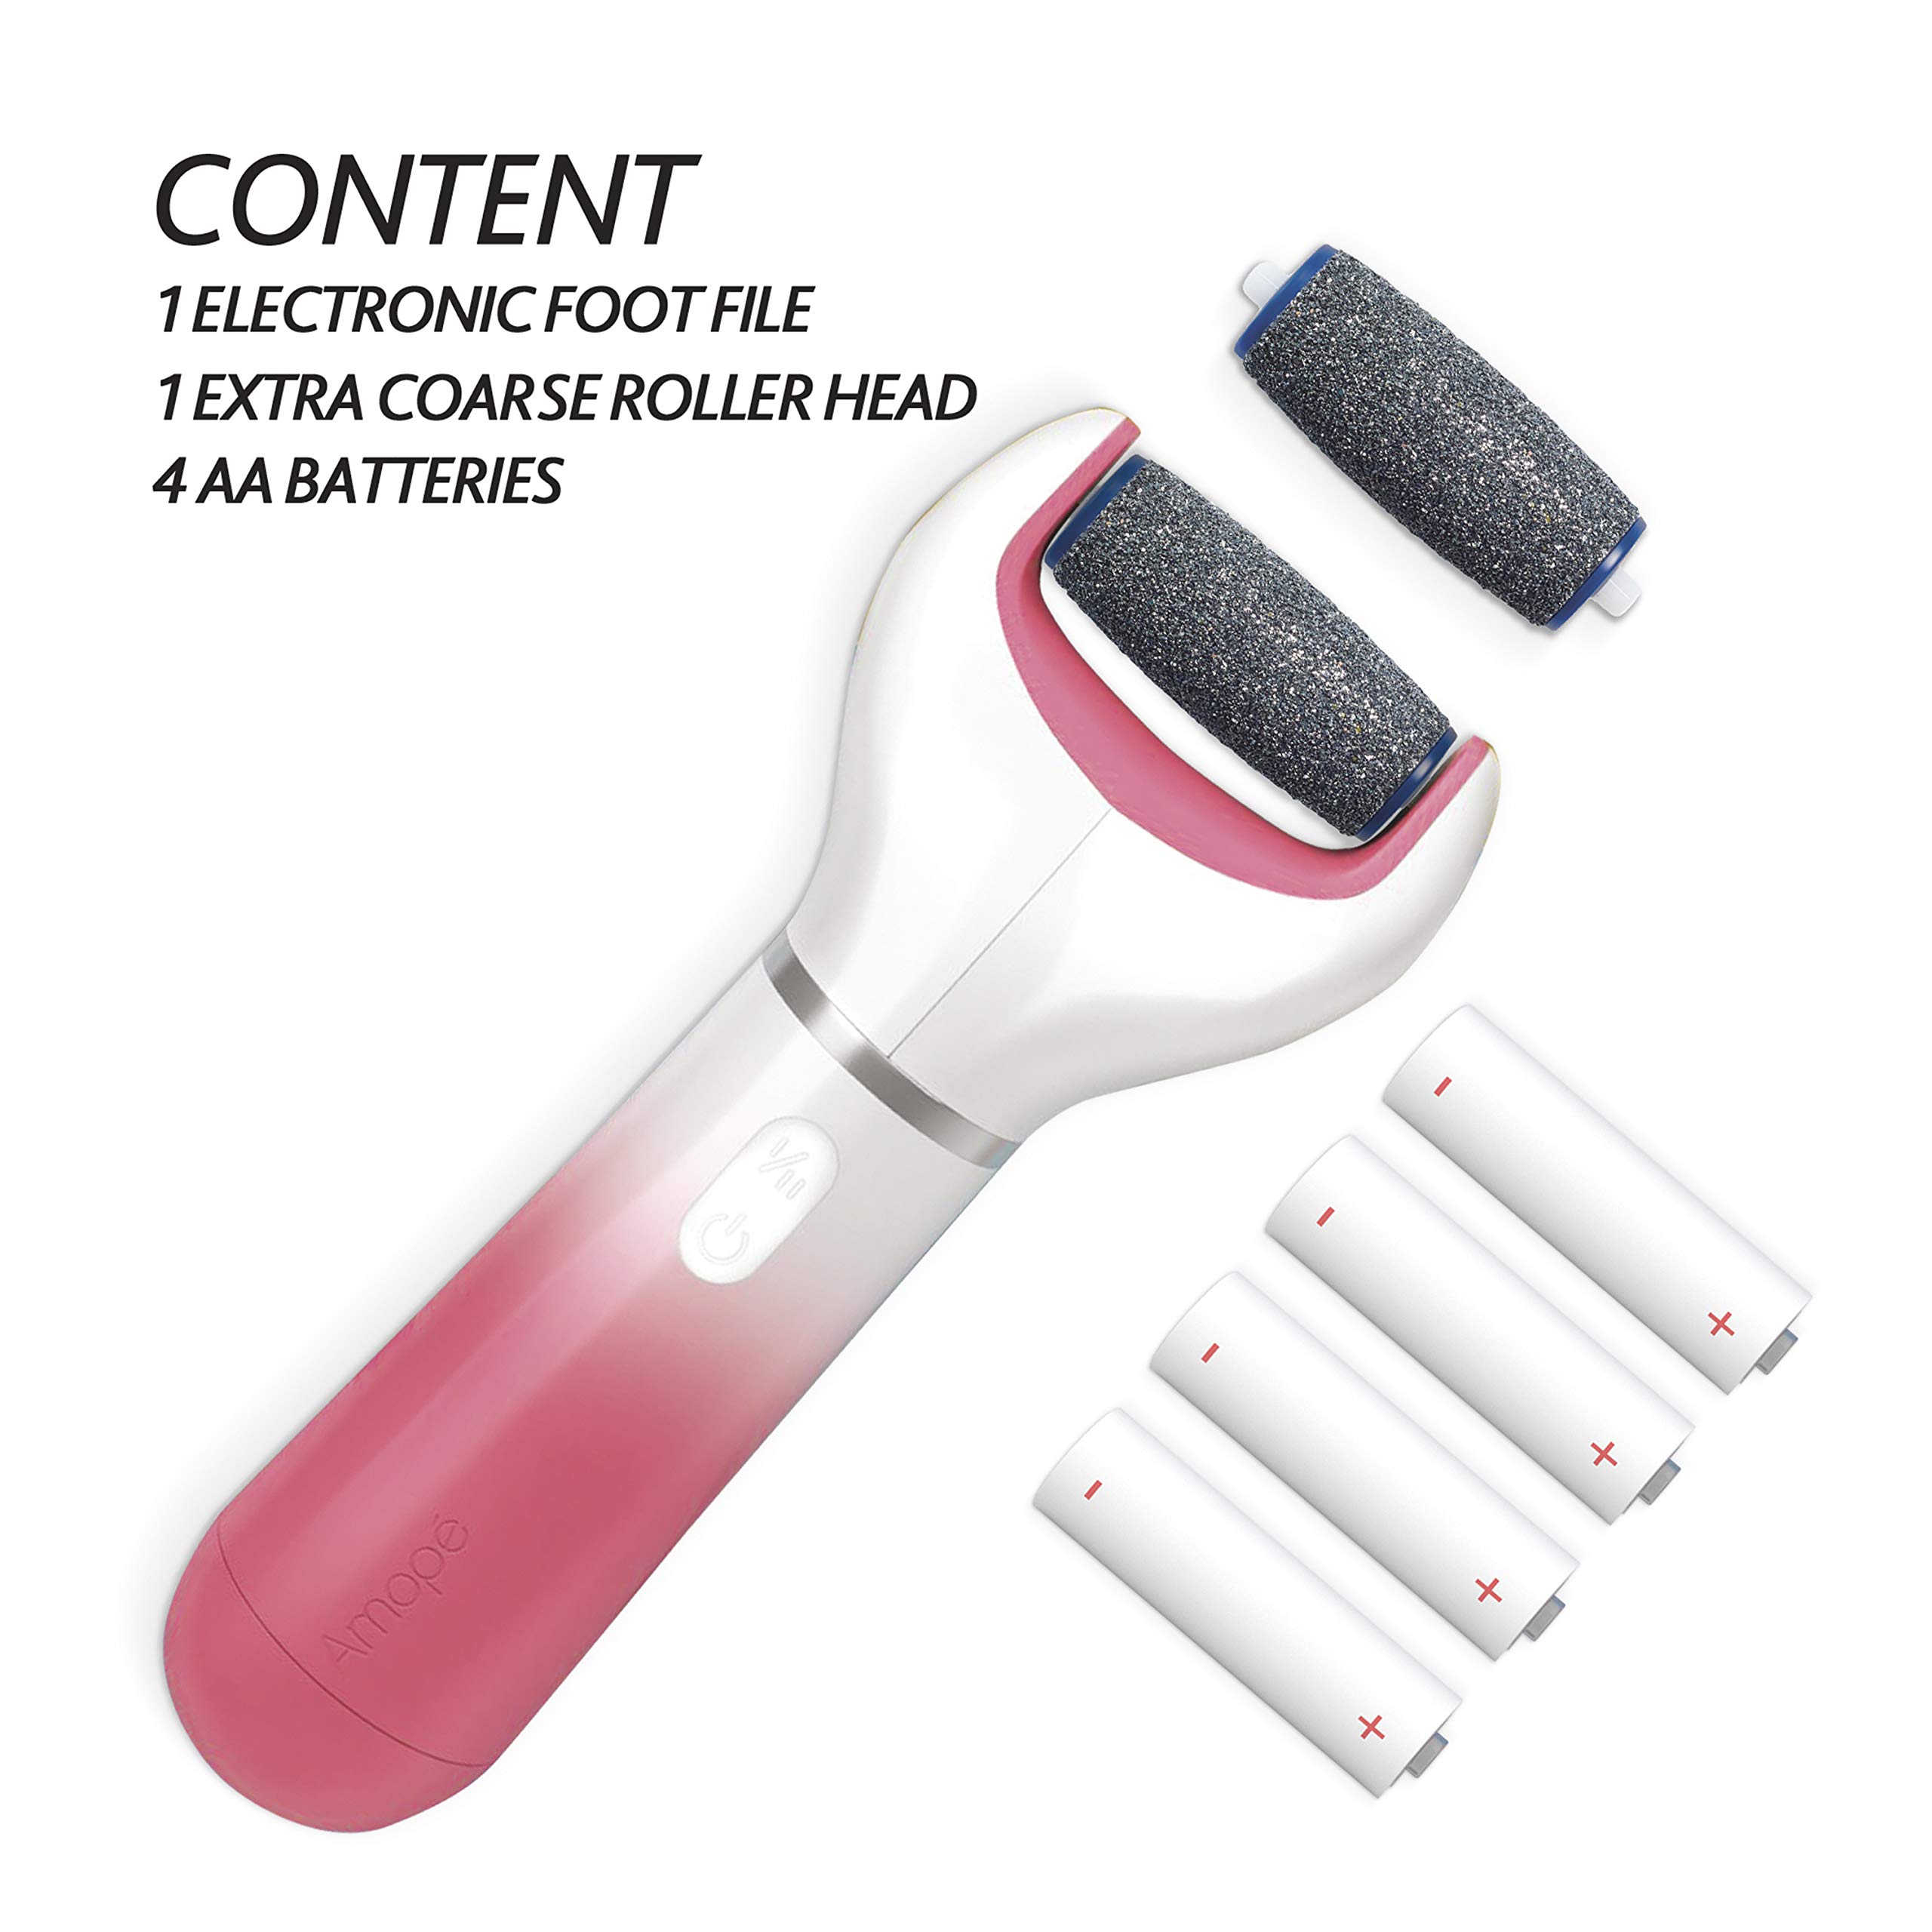 Amope Pedi Perfect Electronic Foot File, Dual-Speed Callus Remover (with Diamond Crystals) for Feet (Extra Coarse - Pink Gadget). -Perfect for In-home Pedicure for Baby Smooth Feet. Battery Operated